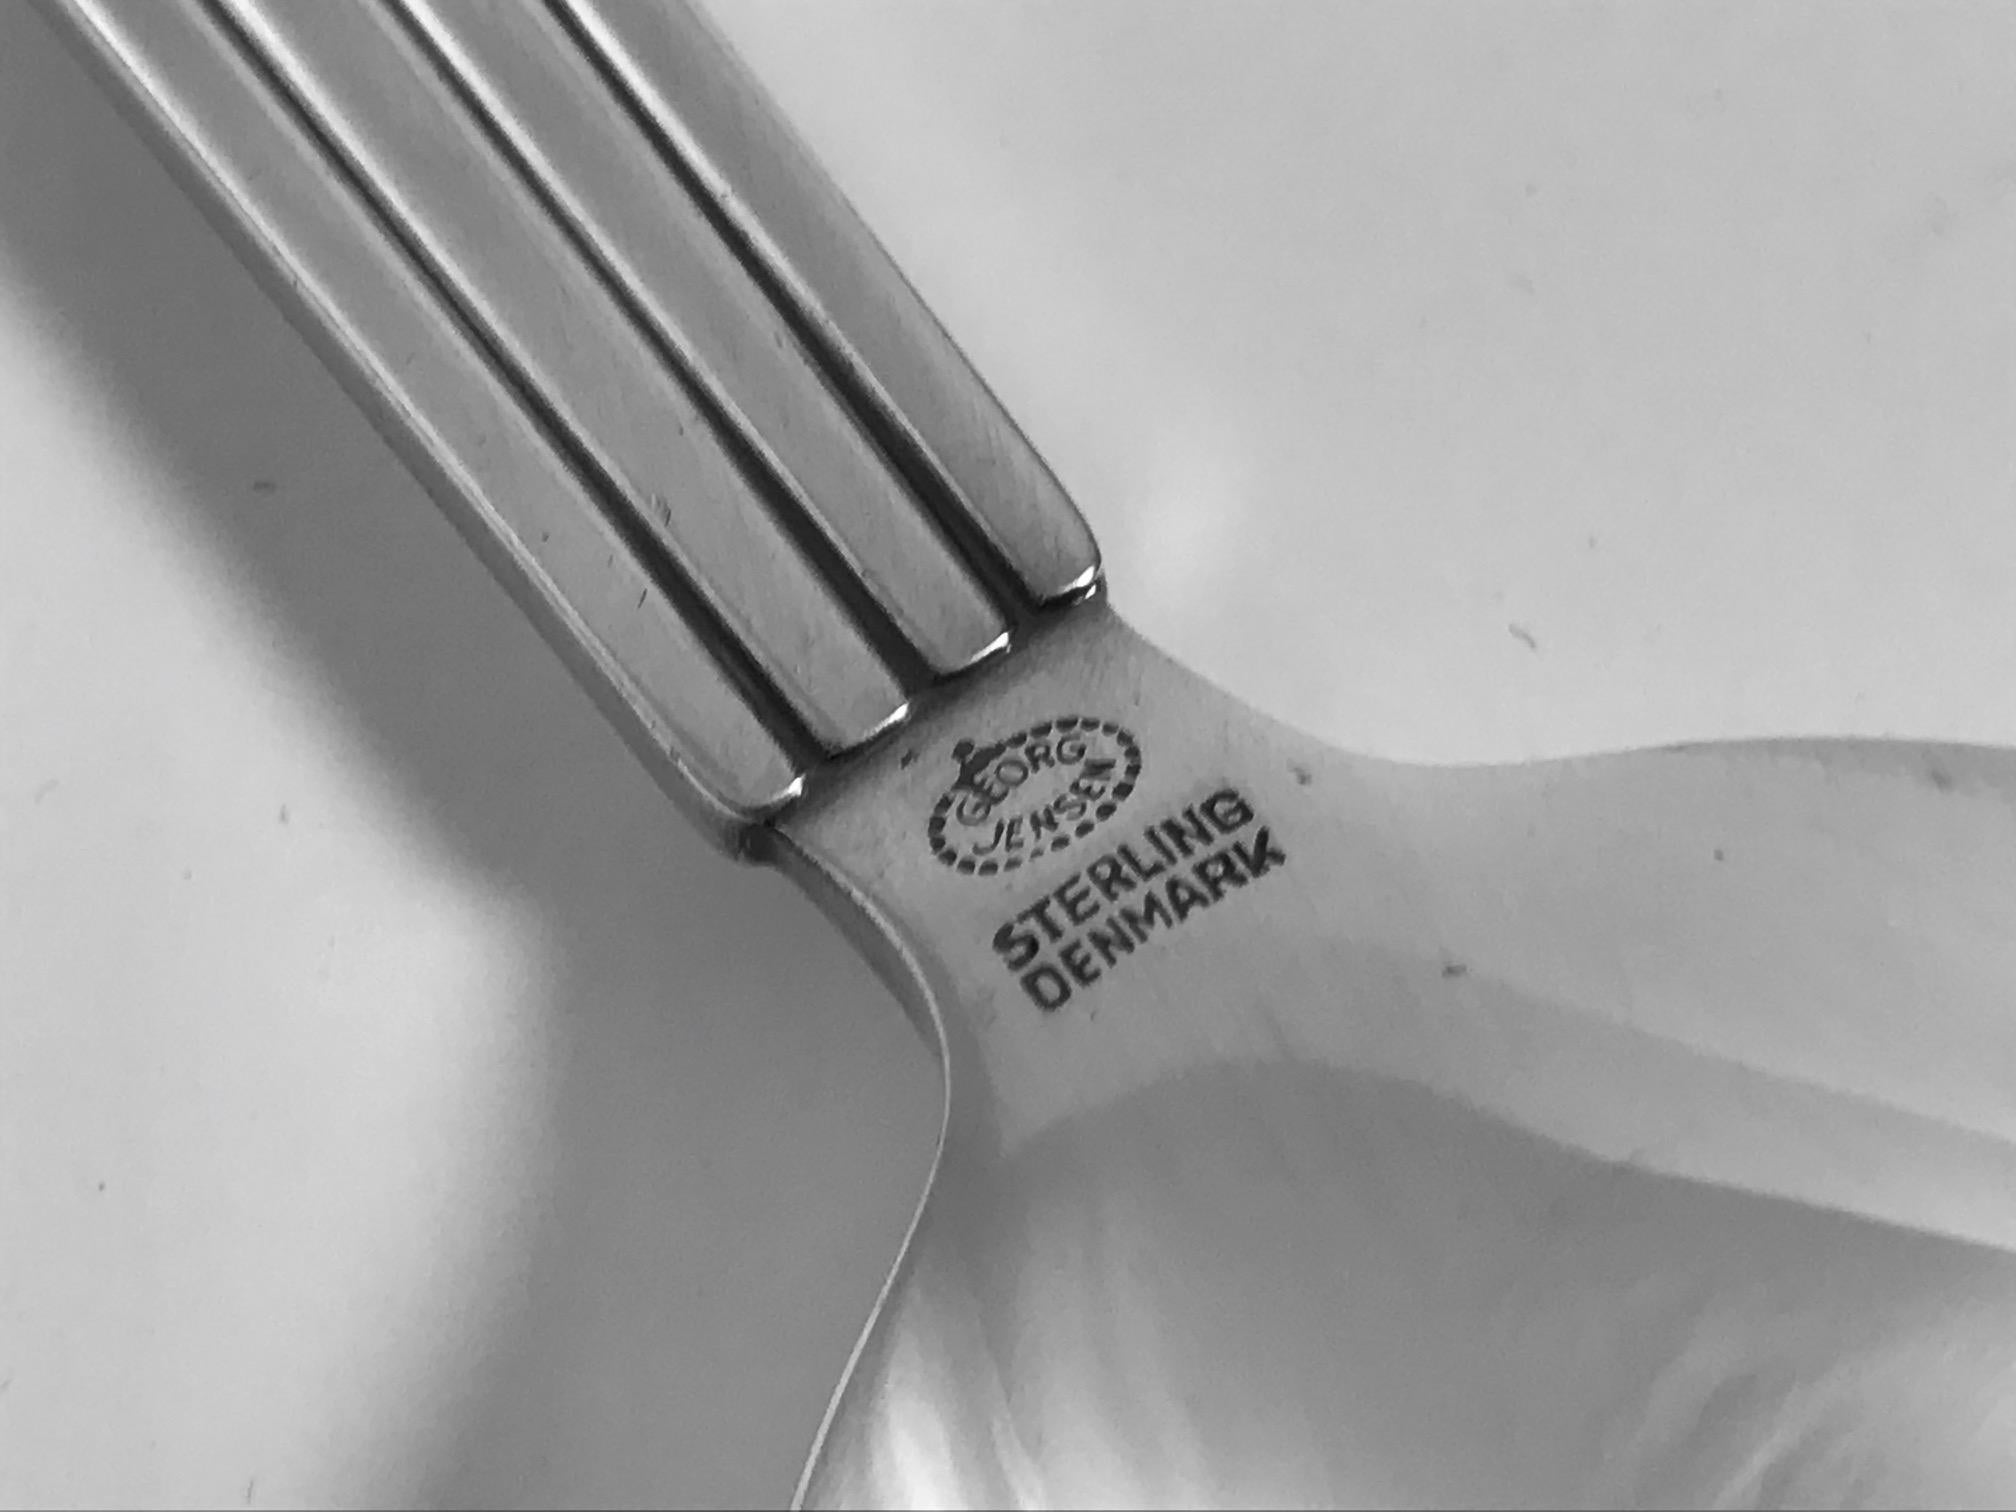 A Georg Jensen sterling silverware service in the Bernadotte pattern, designed by Sigvard Bernadotte in 1939. This set comprises eight settings, each setting of six pieces.

This set includes:
8 dinner knives, long handles, 8 dinner forks, 8